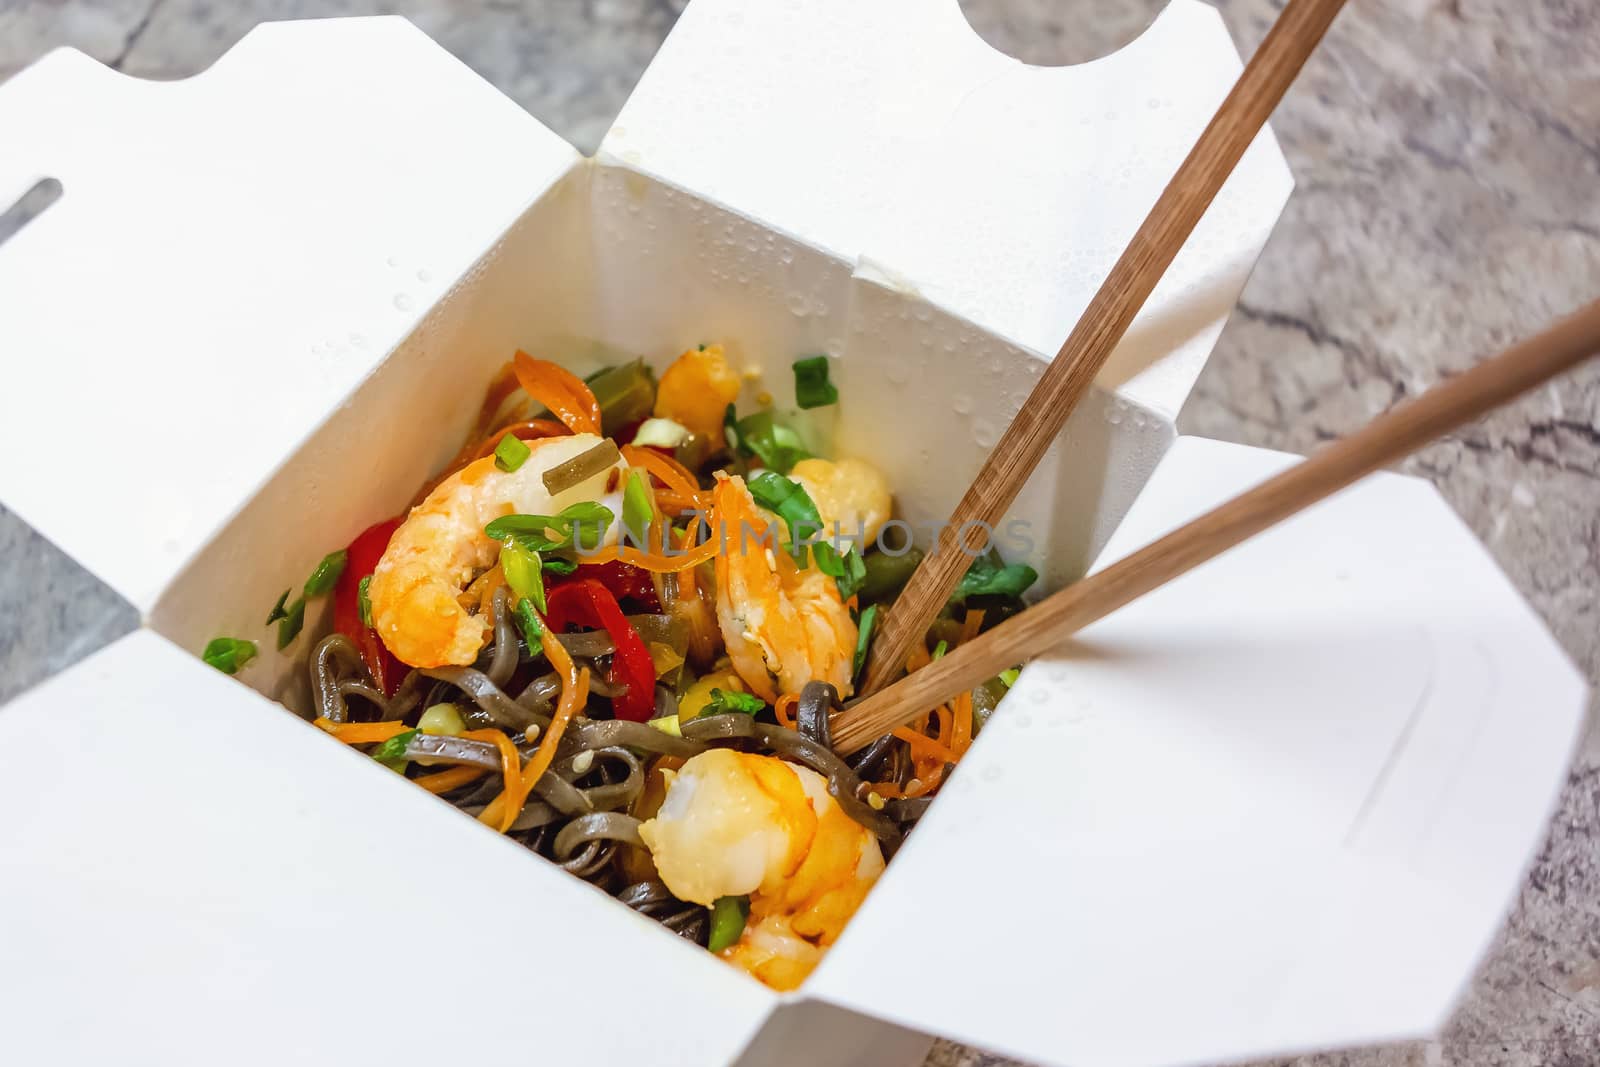 Traditional Chinese takeaway fast food - buckwheat soba noodles with vegetables and shrimps packed in a cardboard box with chopsticks close-up - photo, image by galsand